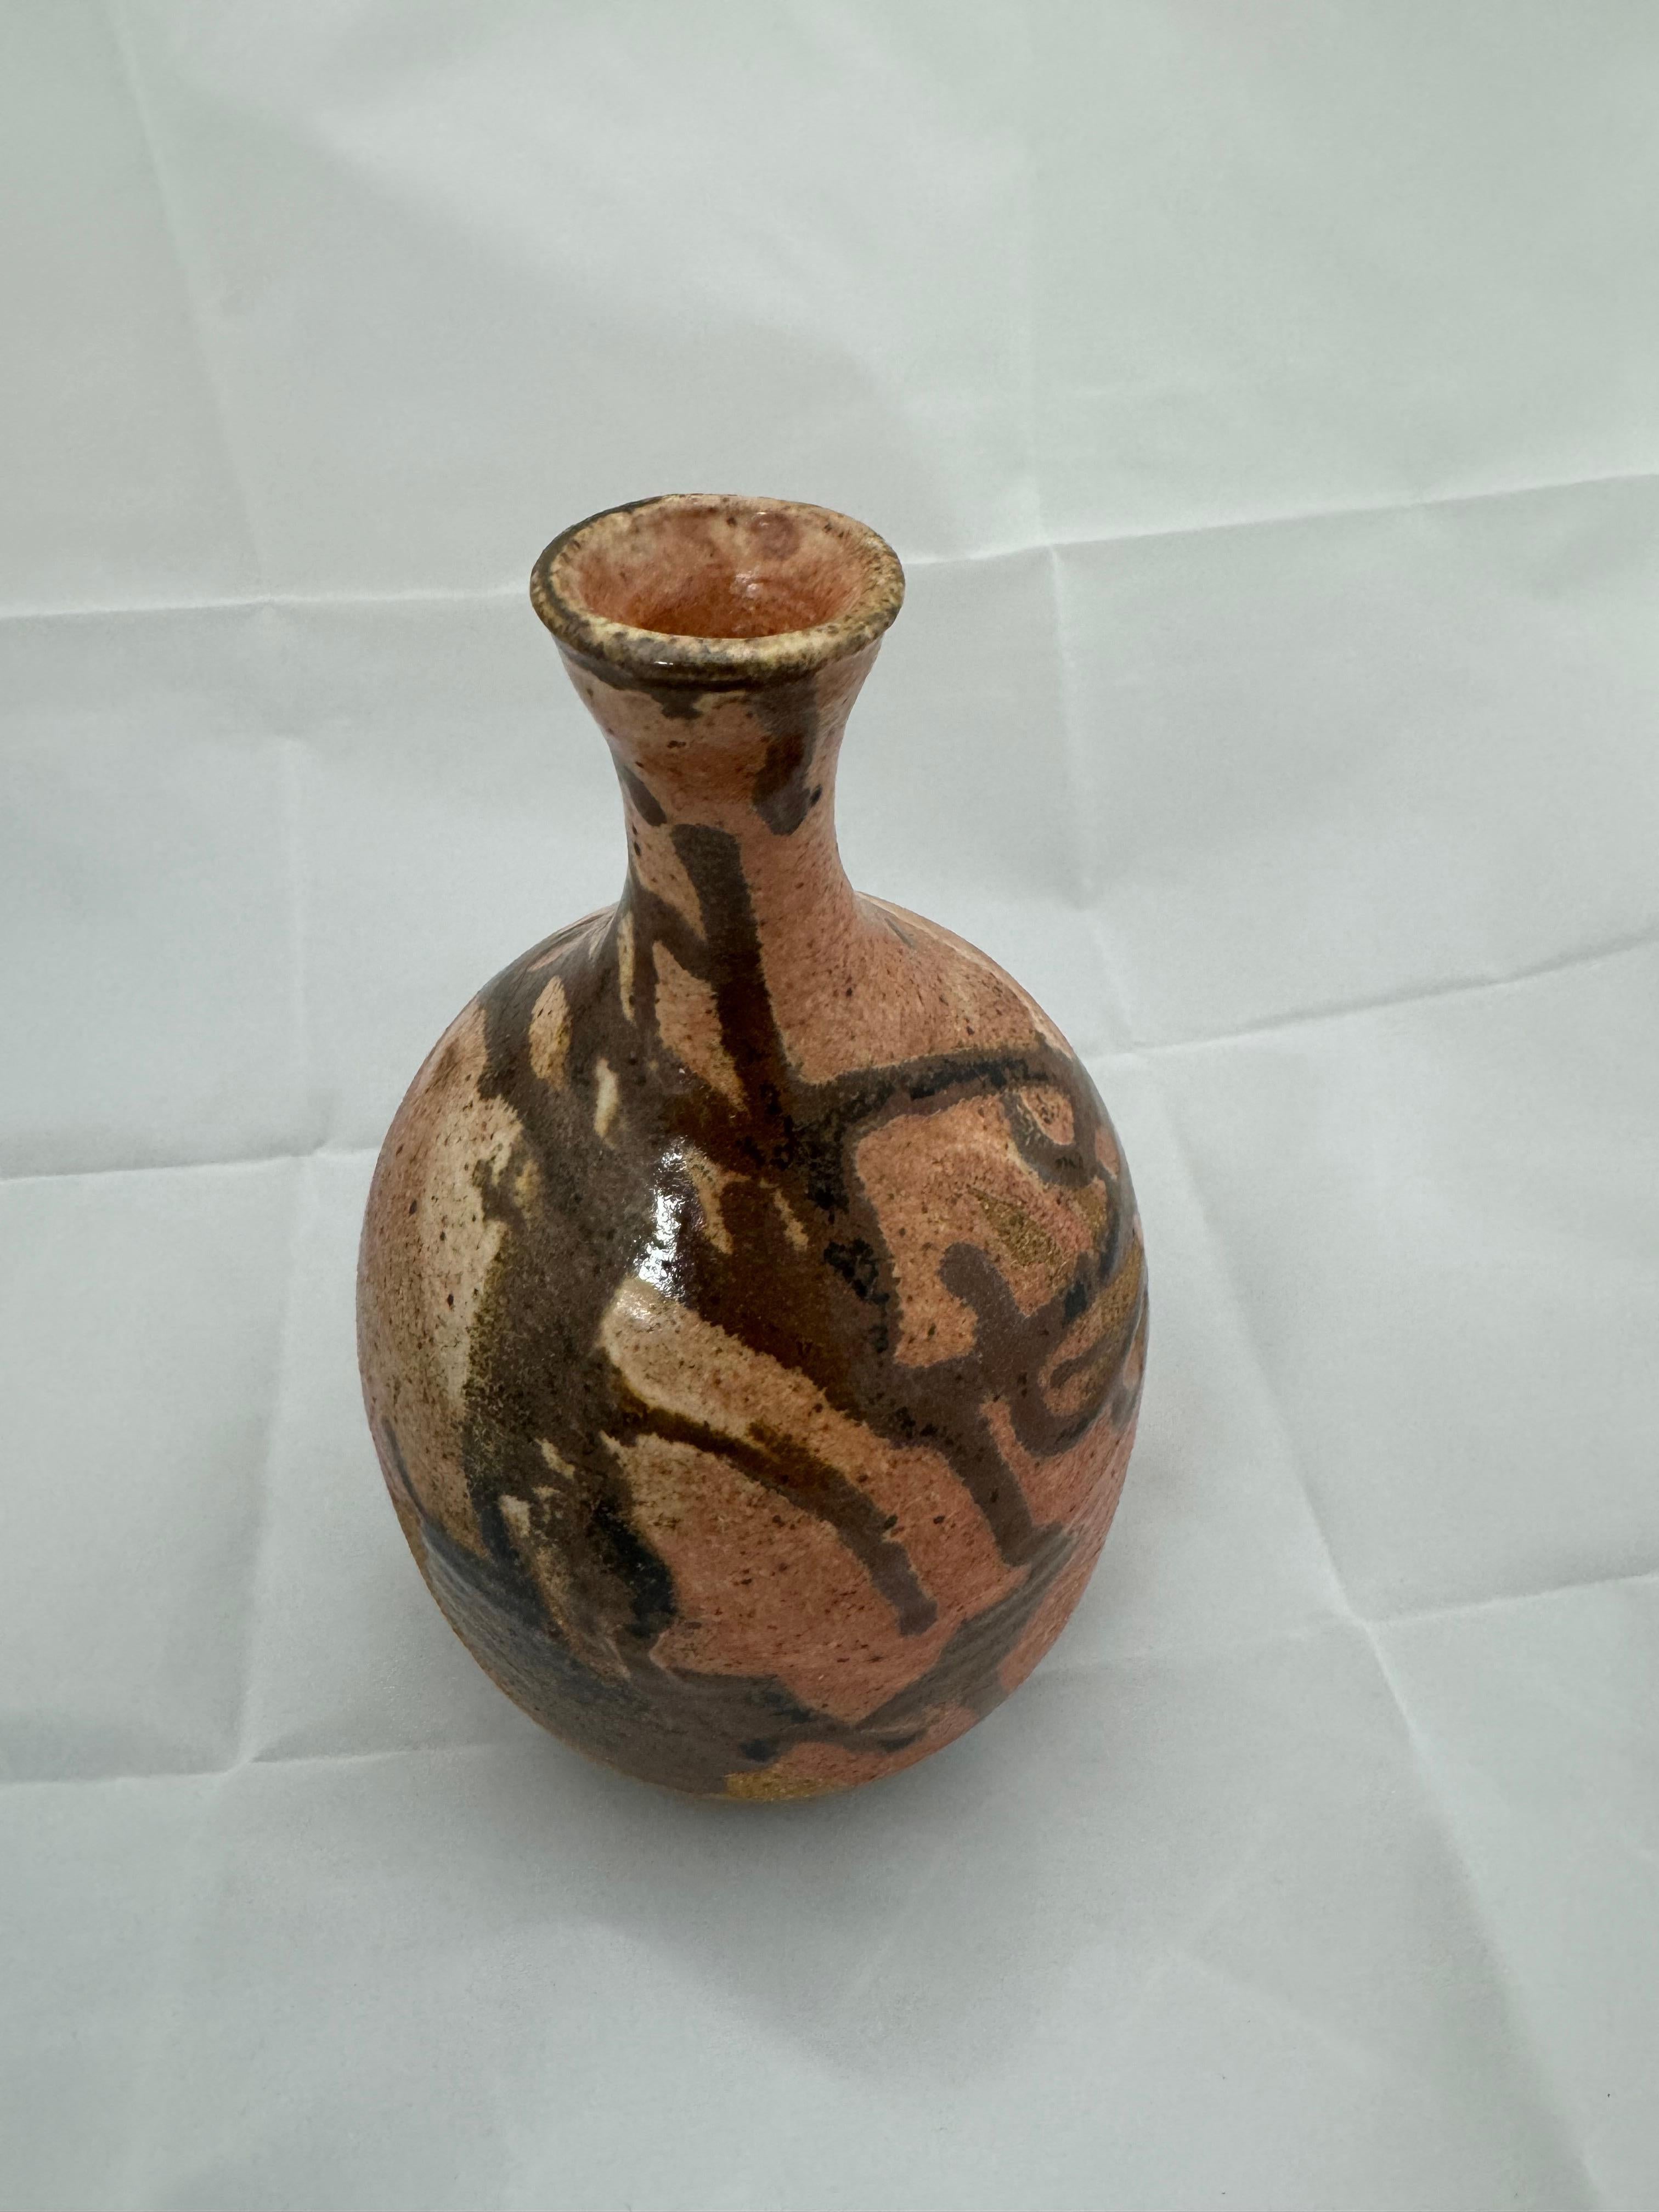 Great piece of studio pottery for your collection